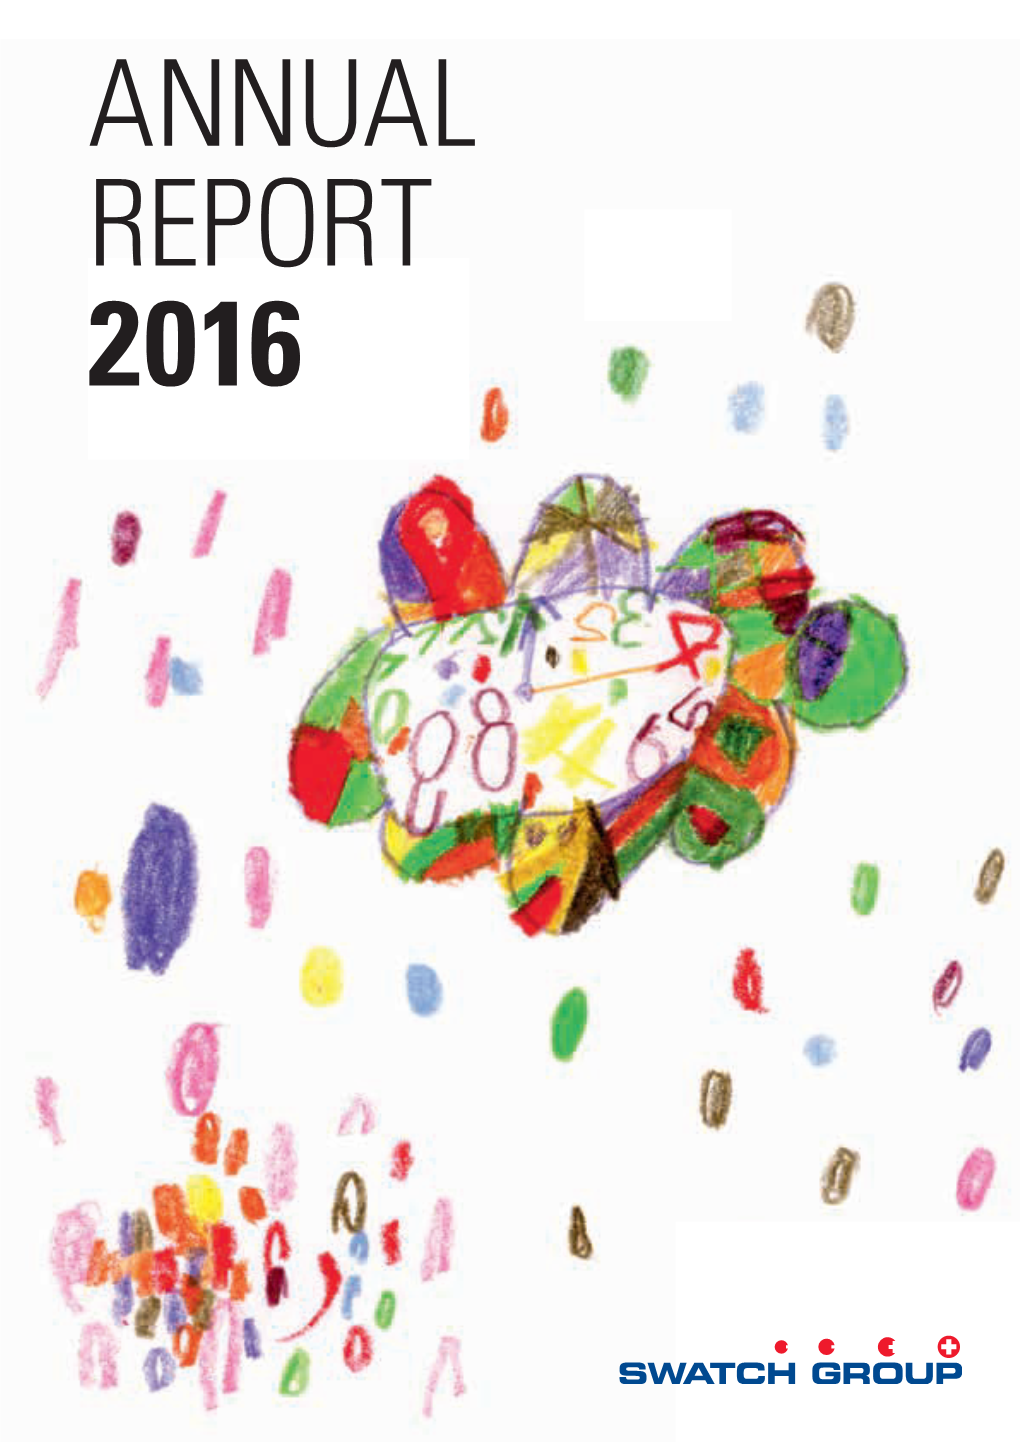 Annual Report 2016 Swatch Group / Annual Report / 2016